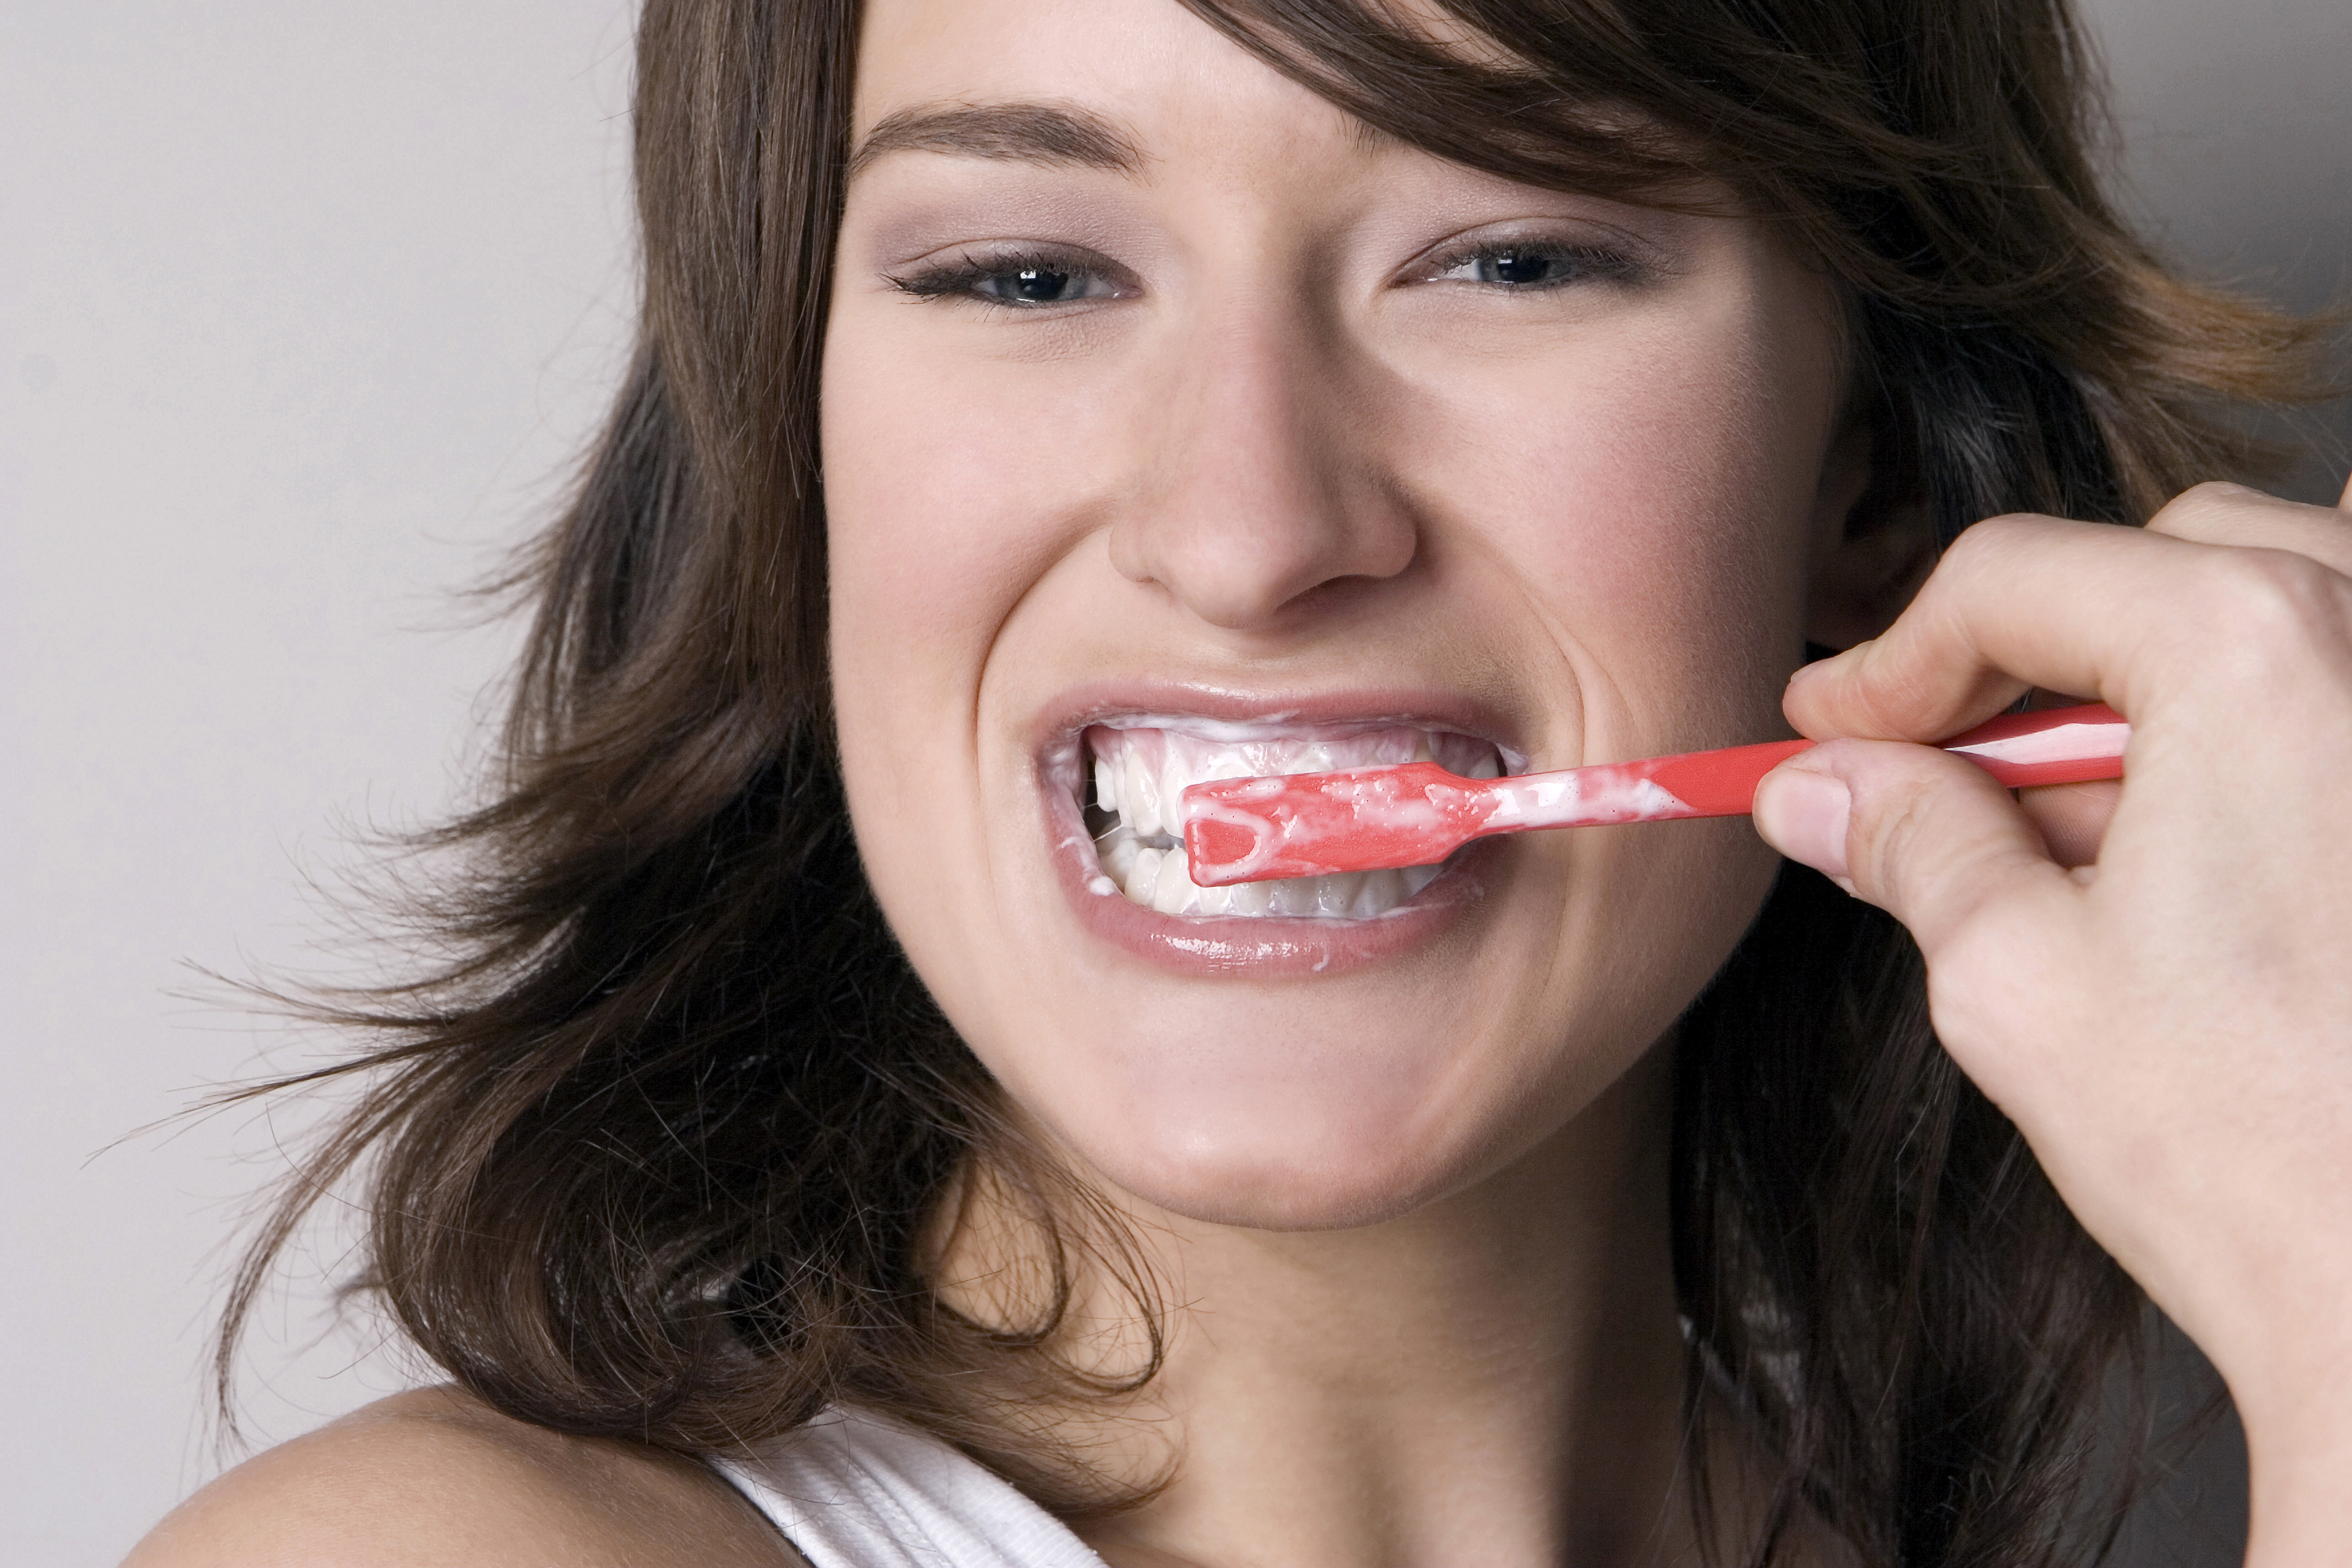 Tips on Properly Brushing Your Teeth